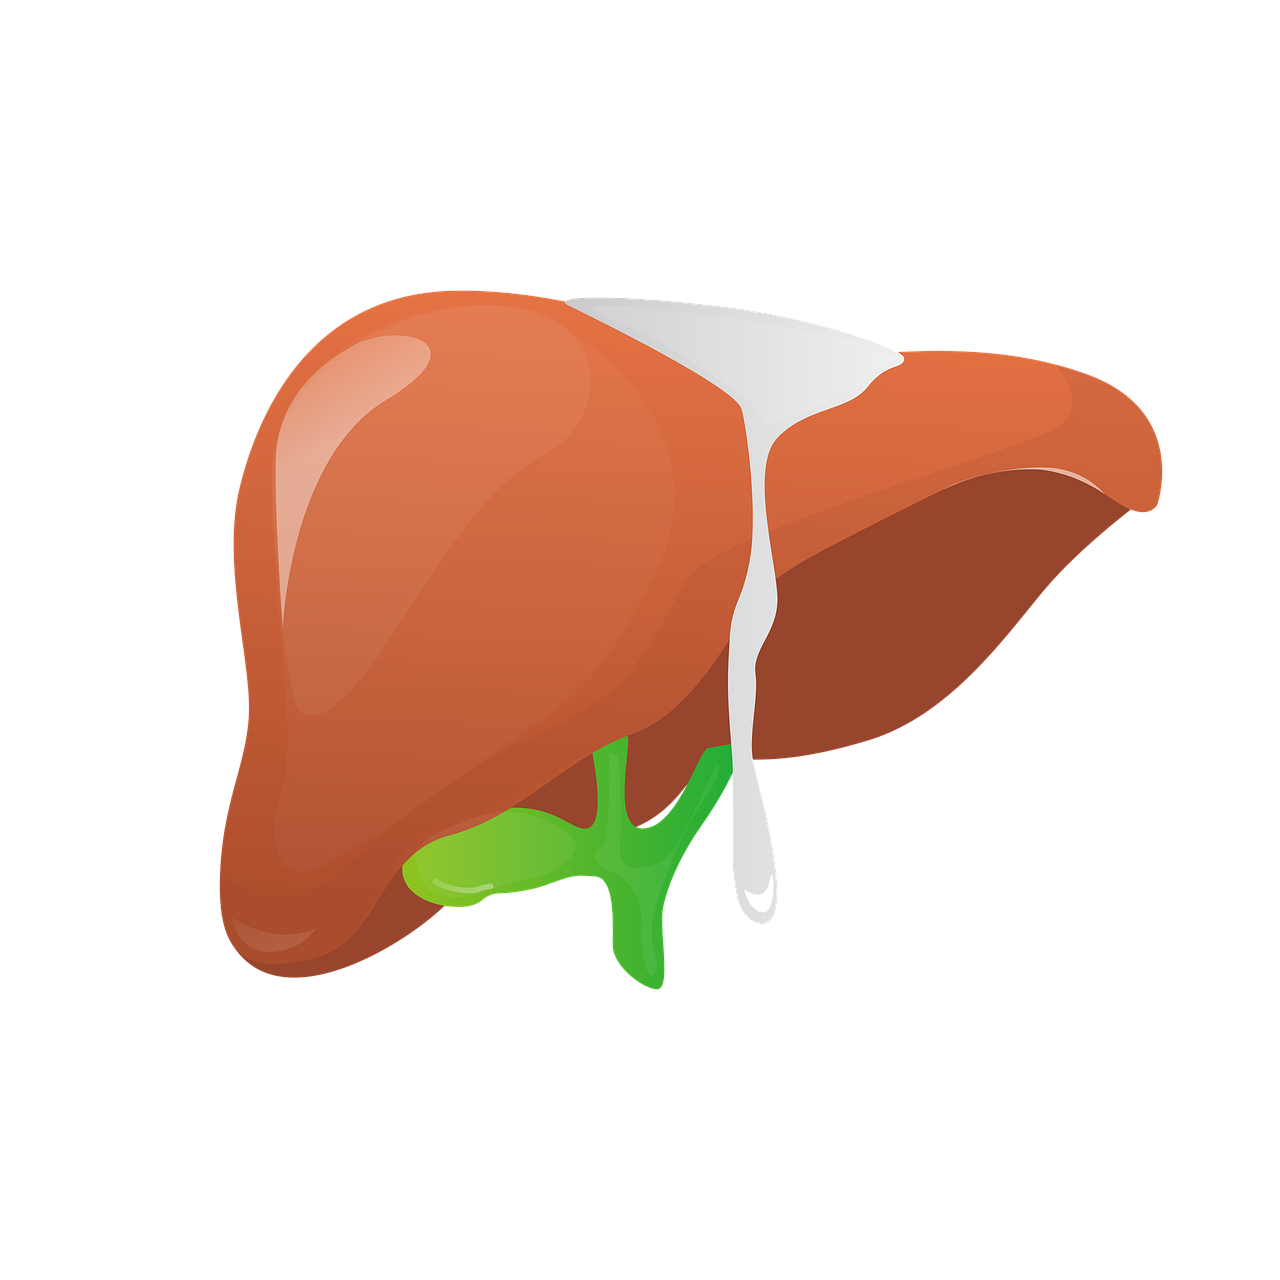 Liver Toxicity and Hepatotoxicity